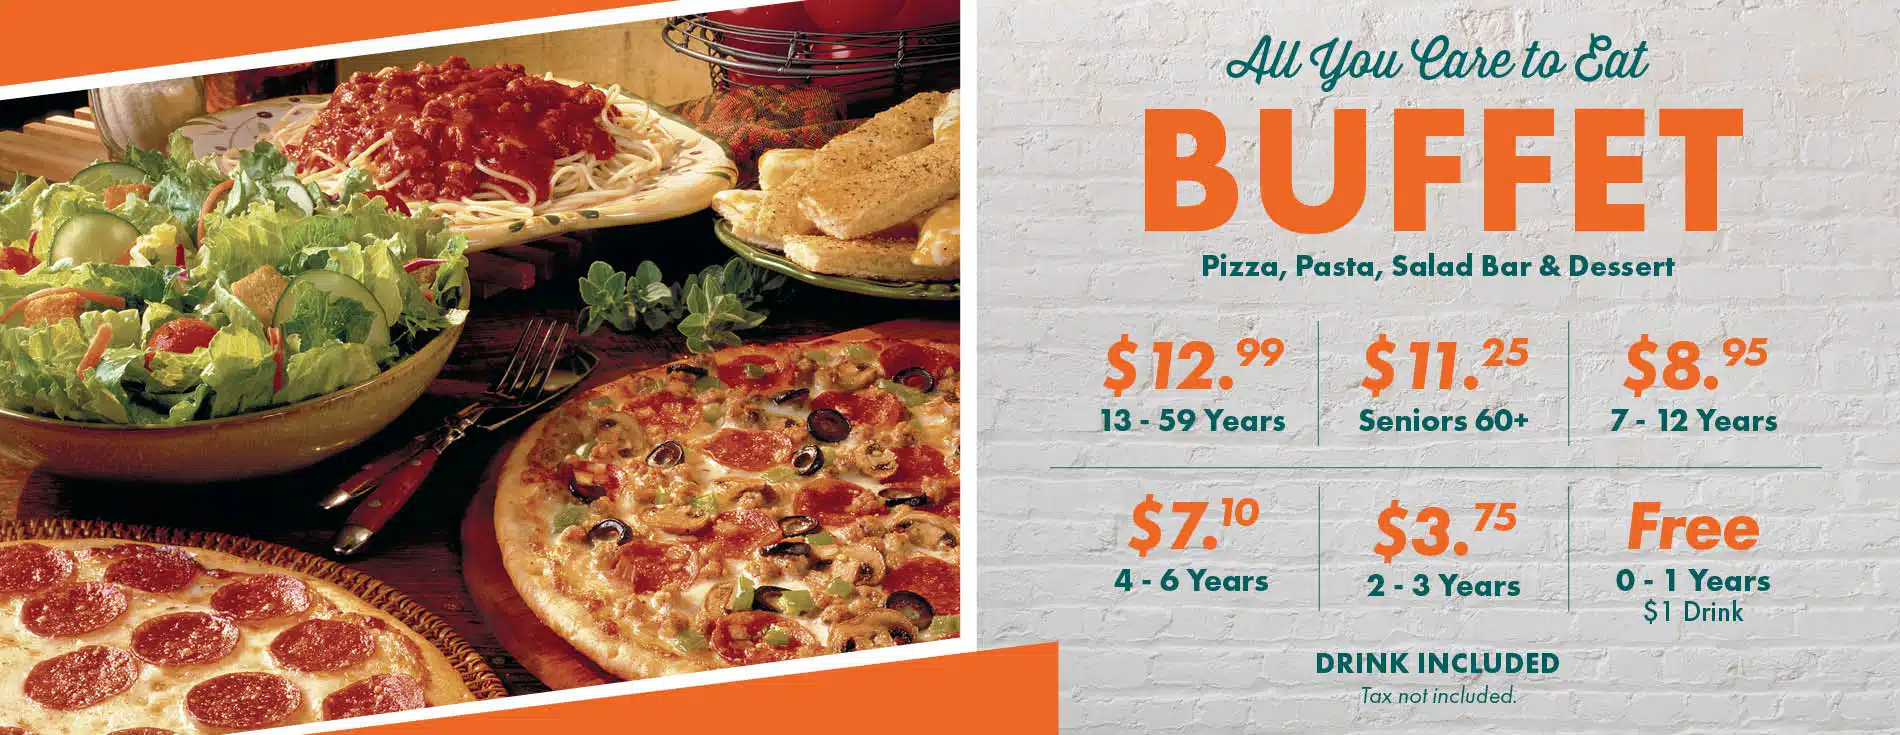 Portsmouth Buffet Pricing